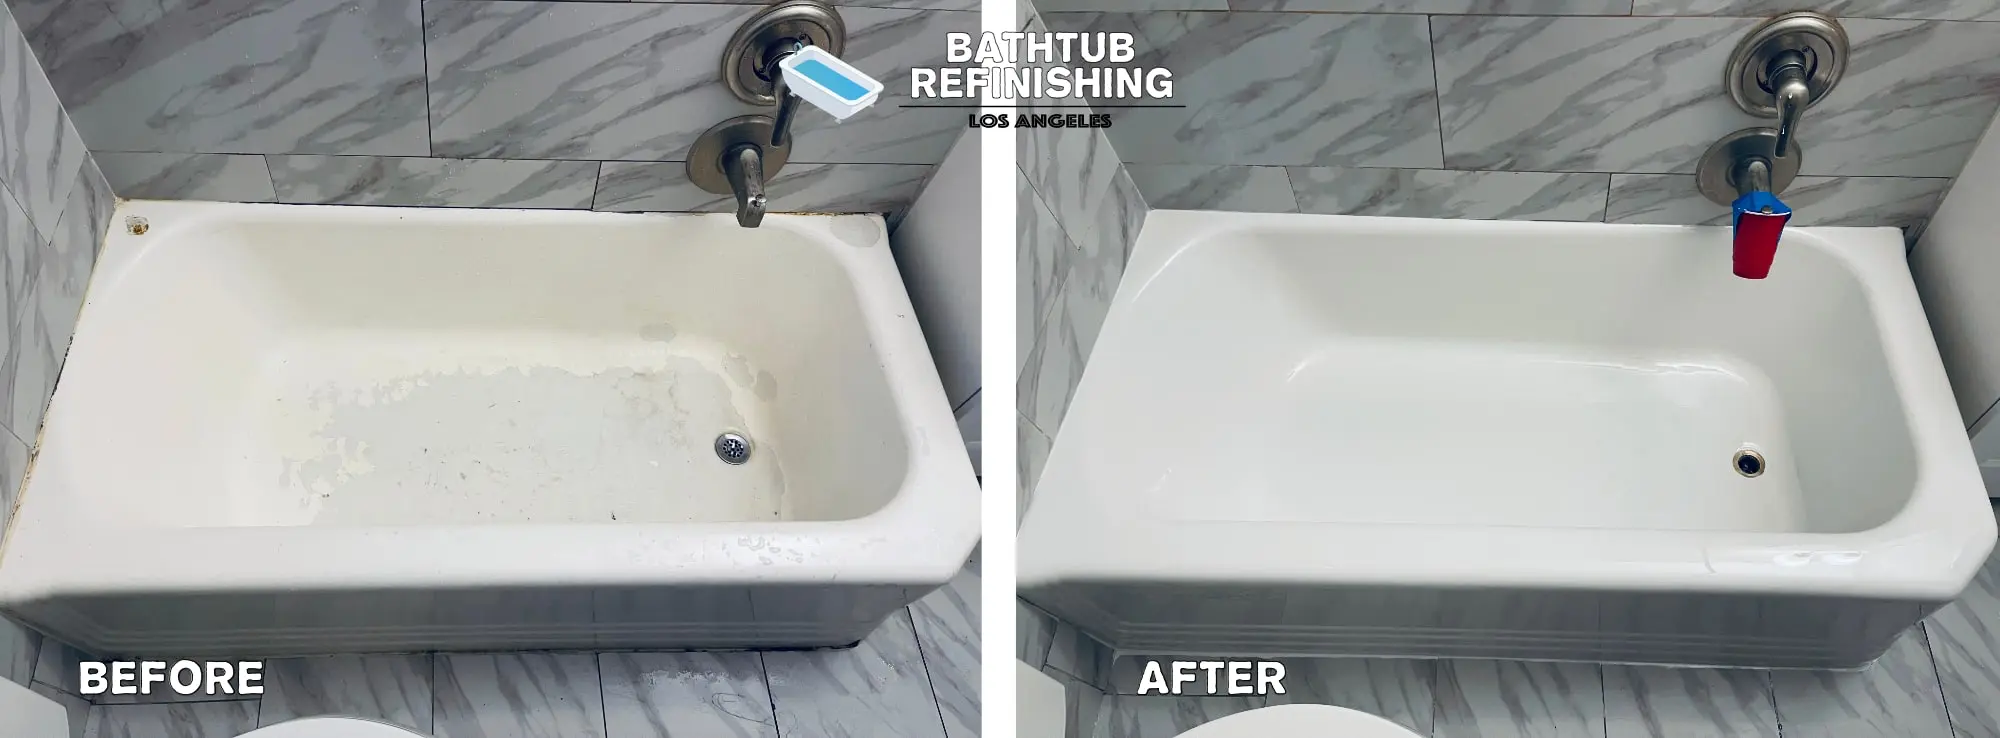 Tub Refinishing Before and After